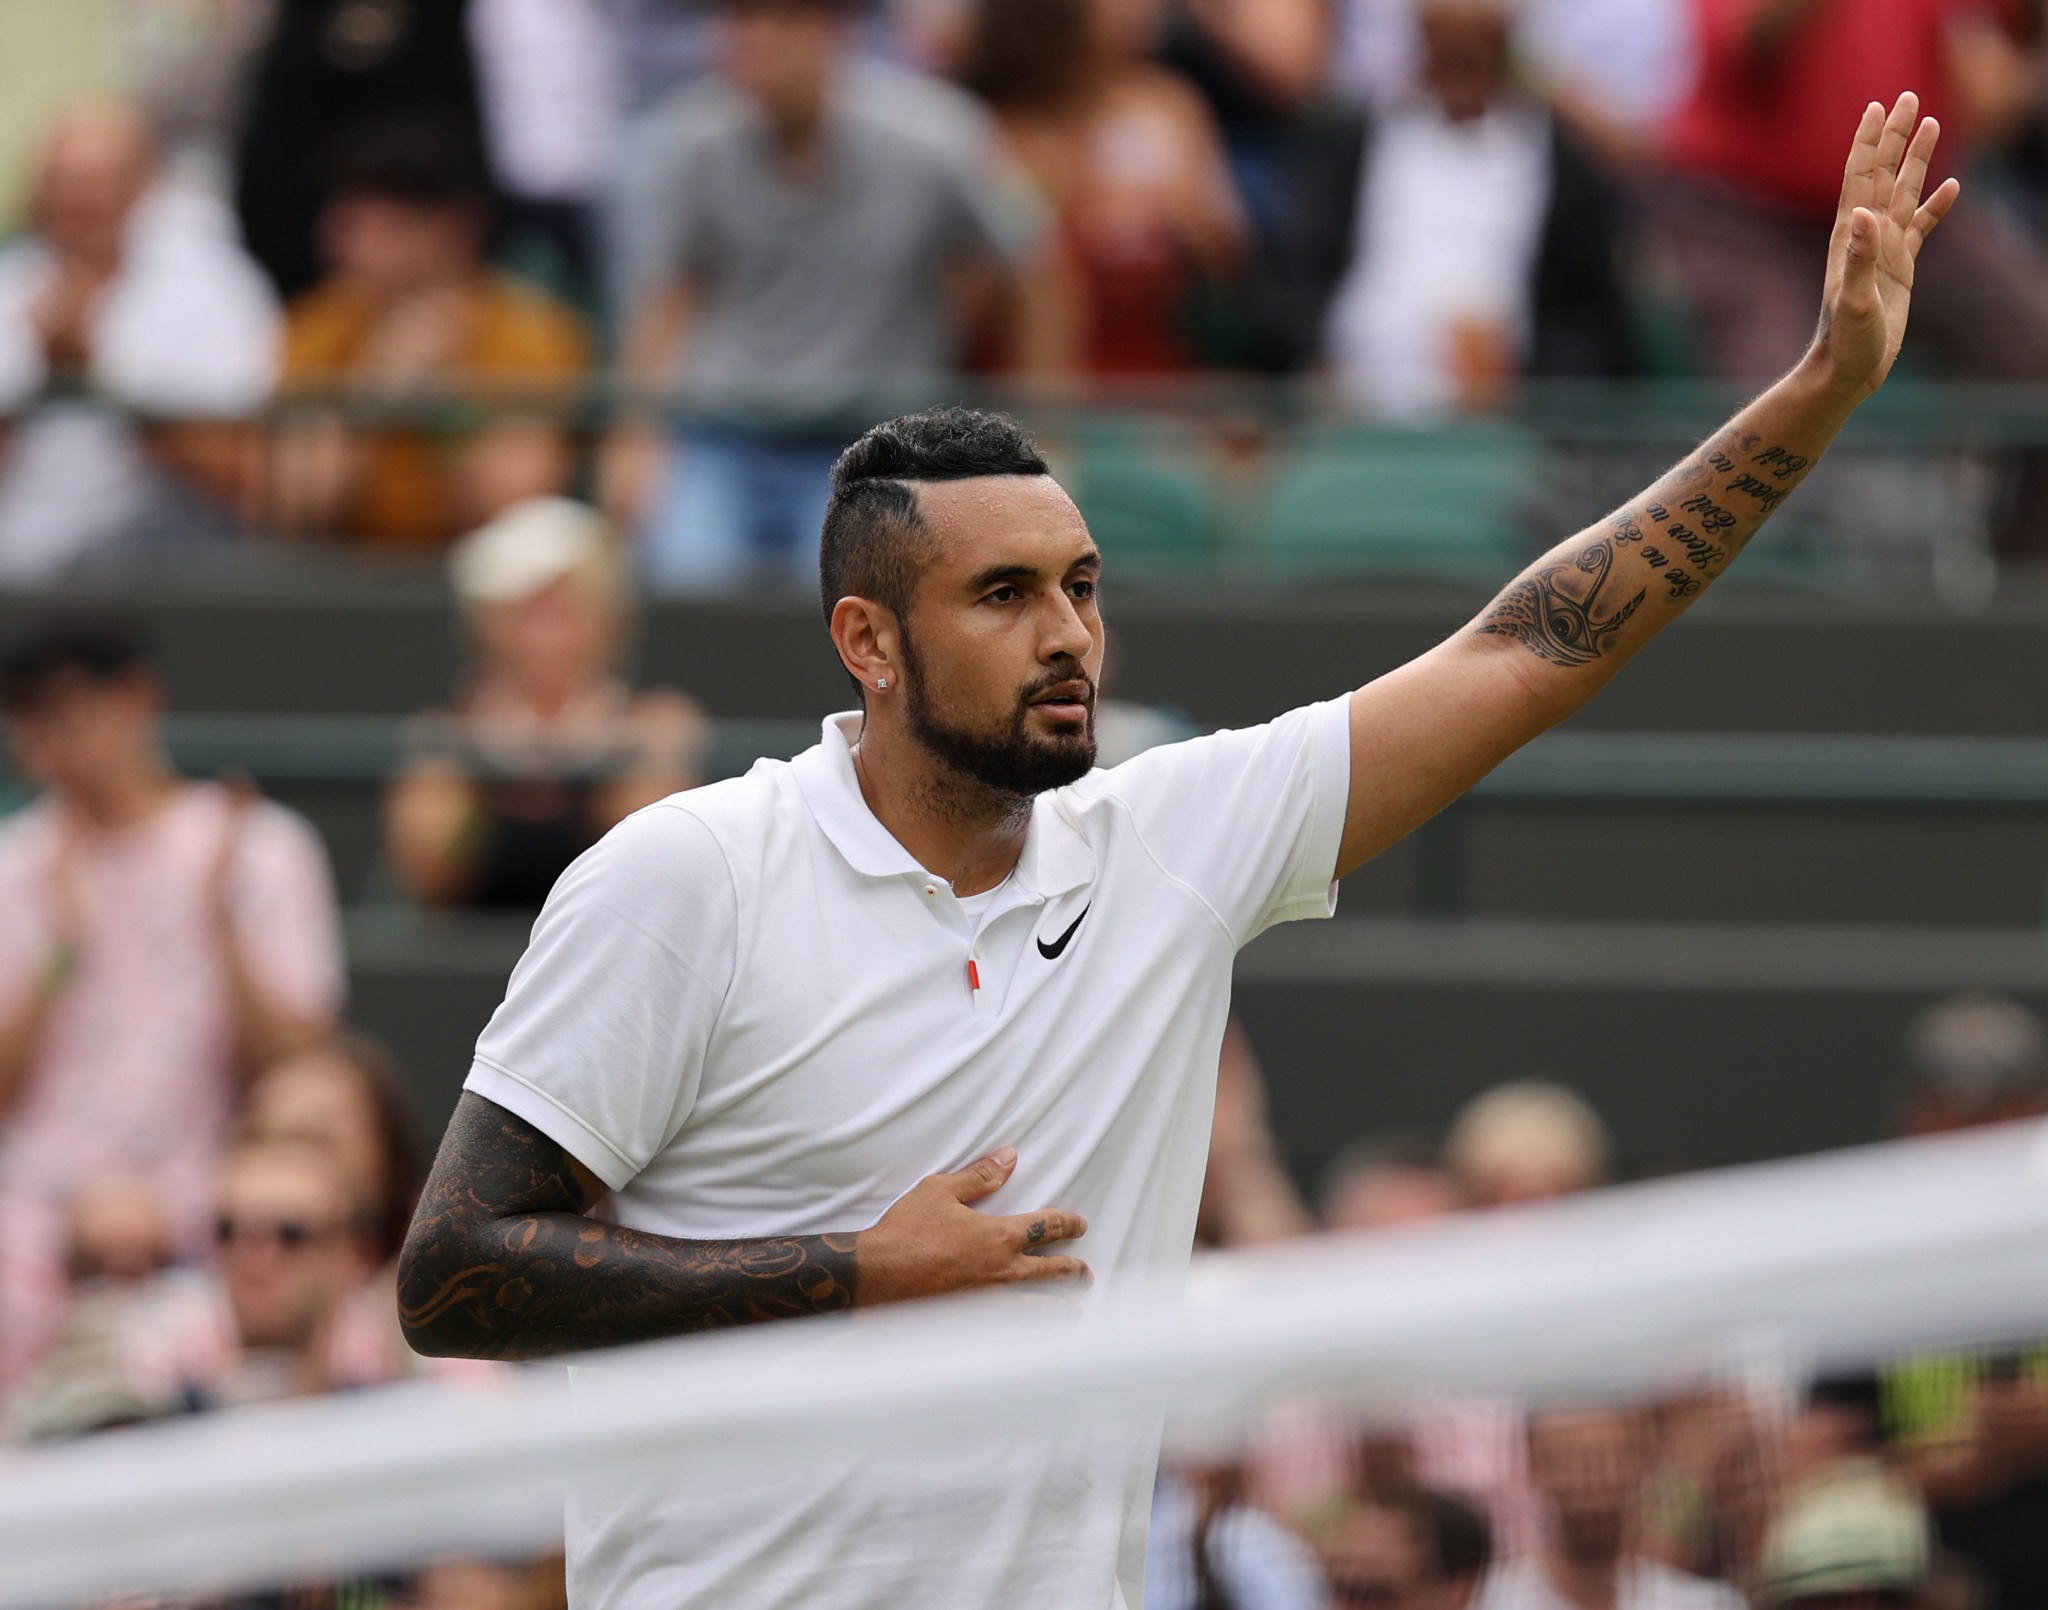 Nick Kyrgios has participated in few overseas events since the pandemic began ©Getty Images